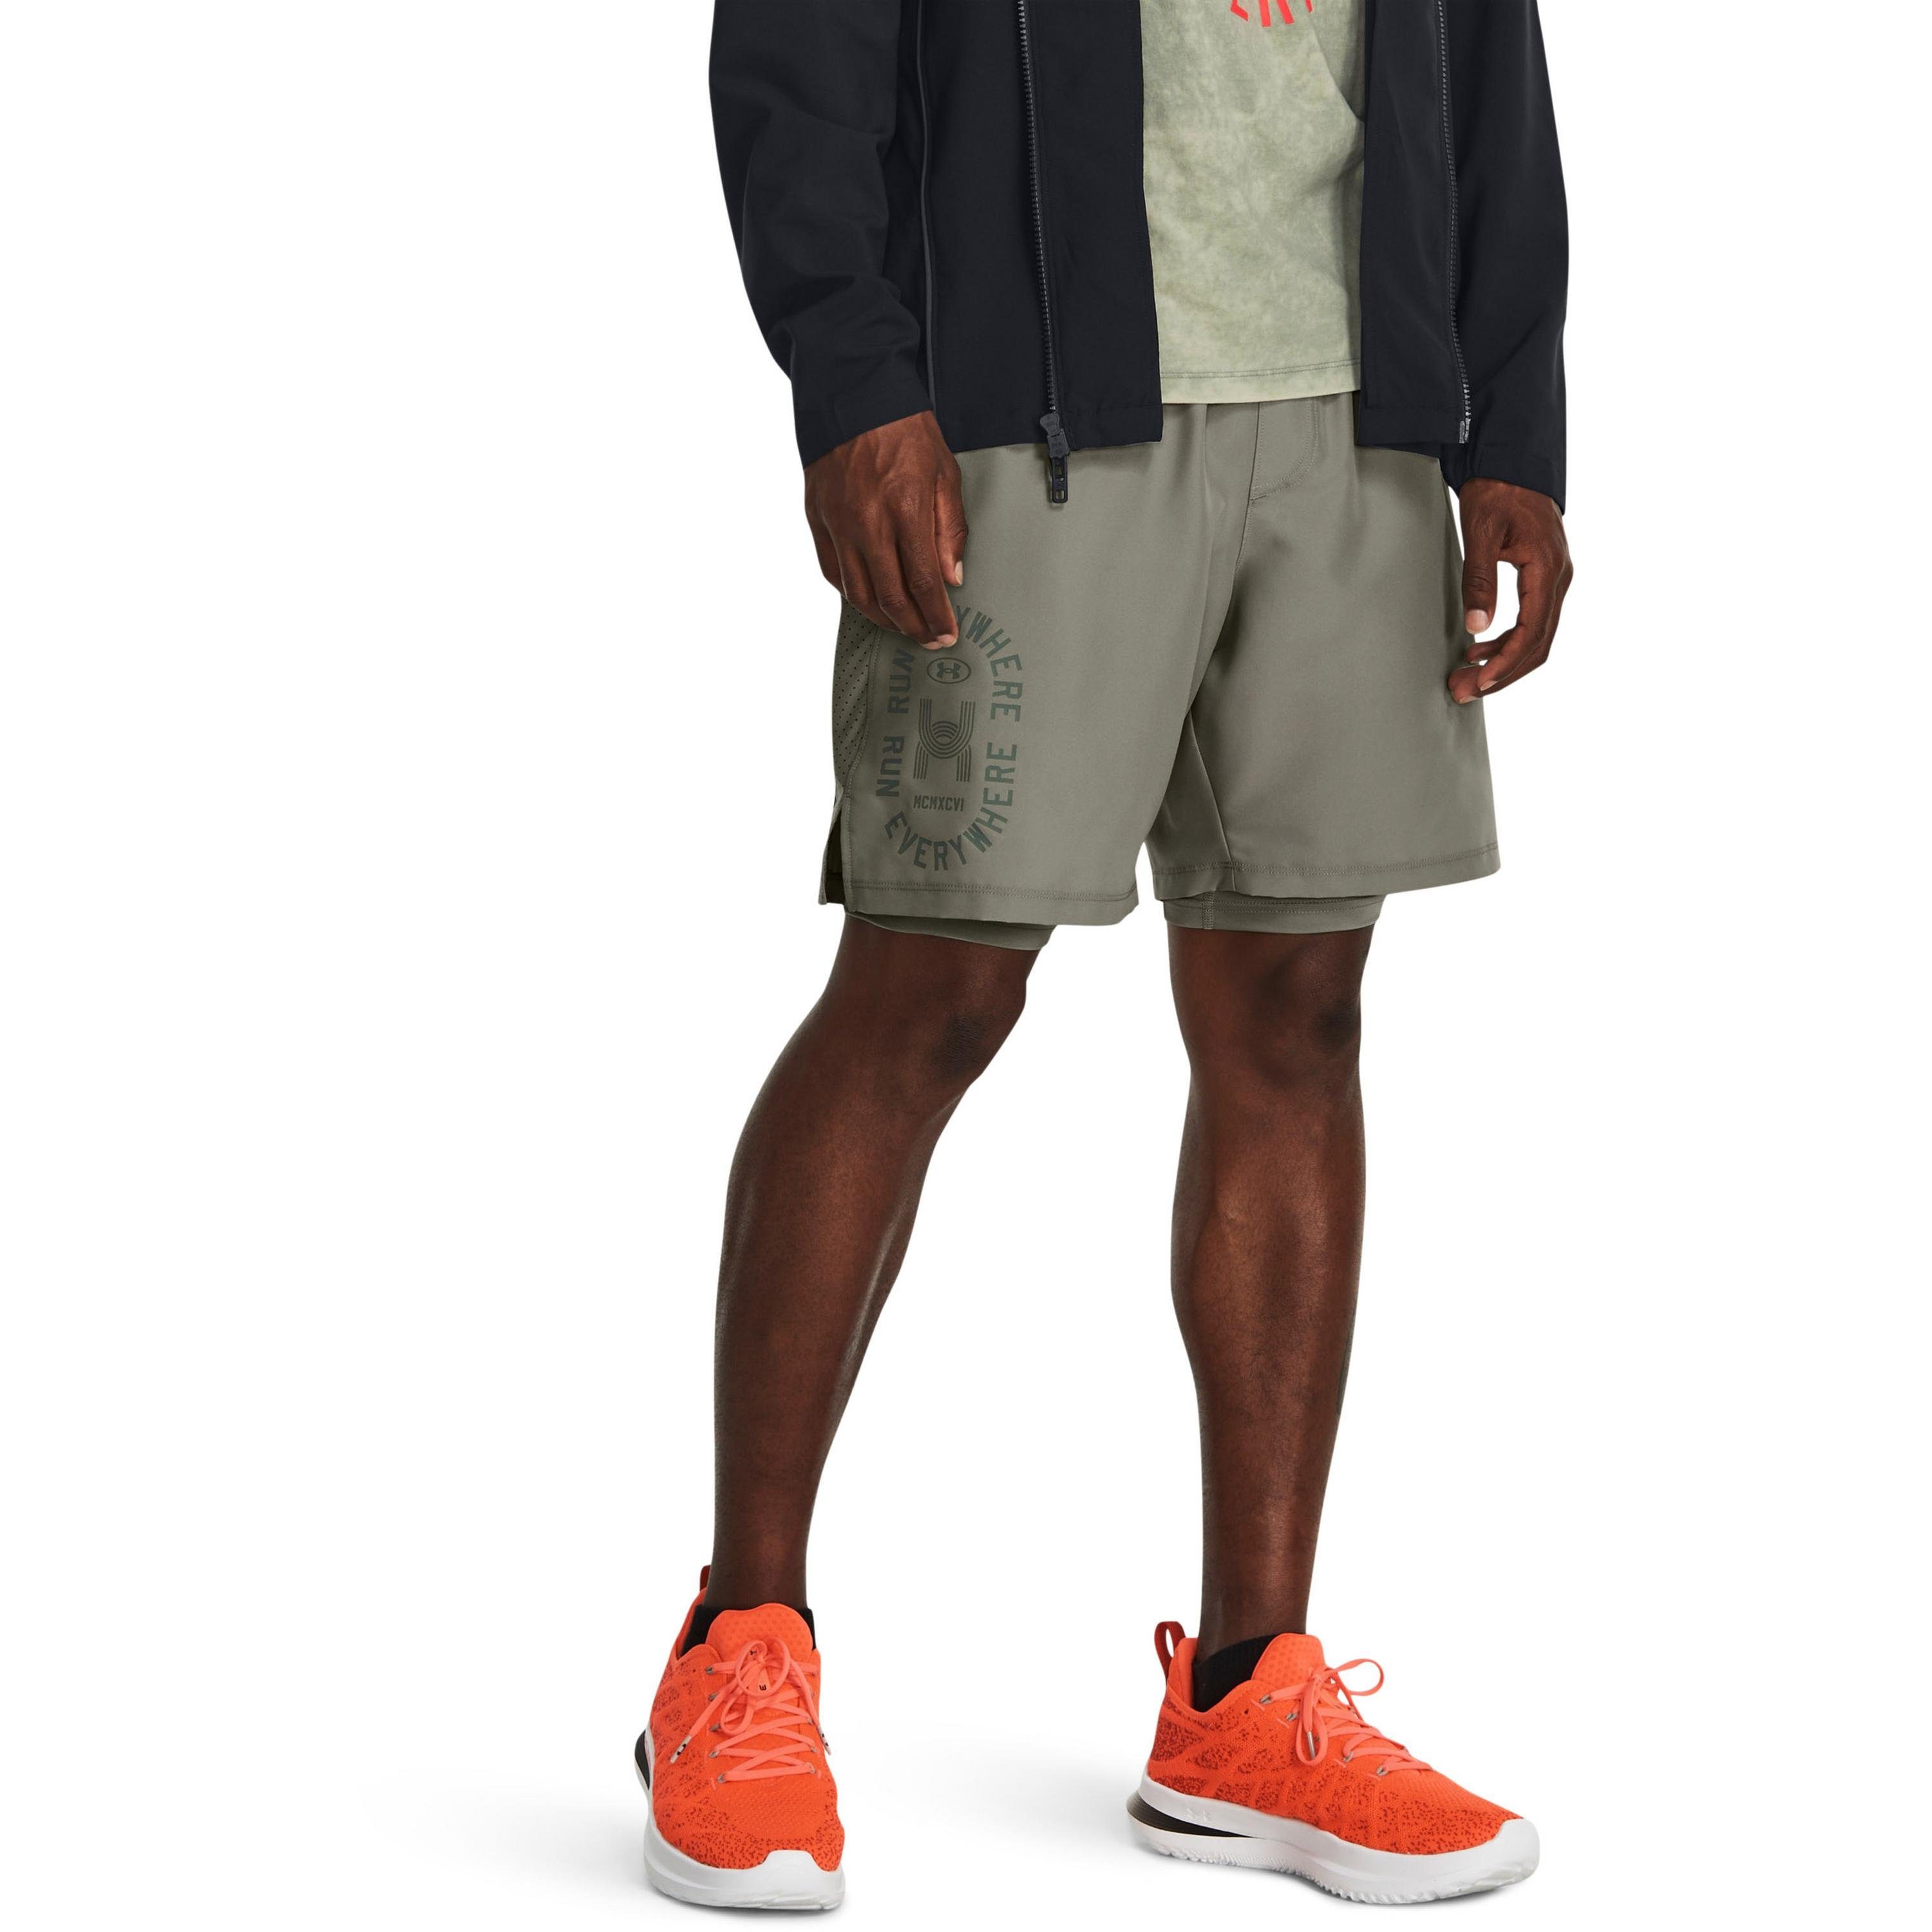 Under Armour® Funktionsshorts RUN grove green EVERYWHERE